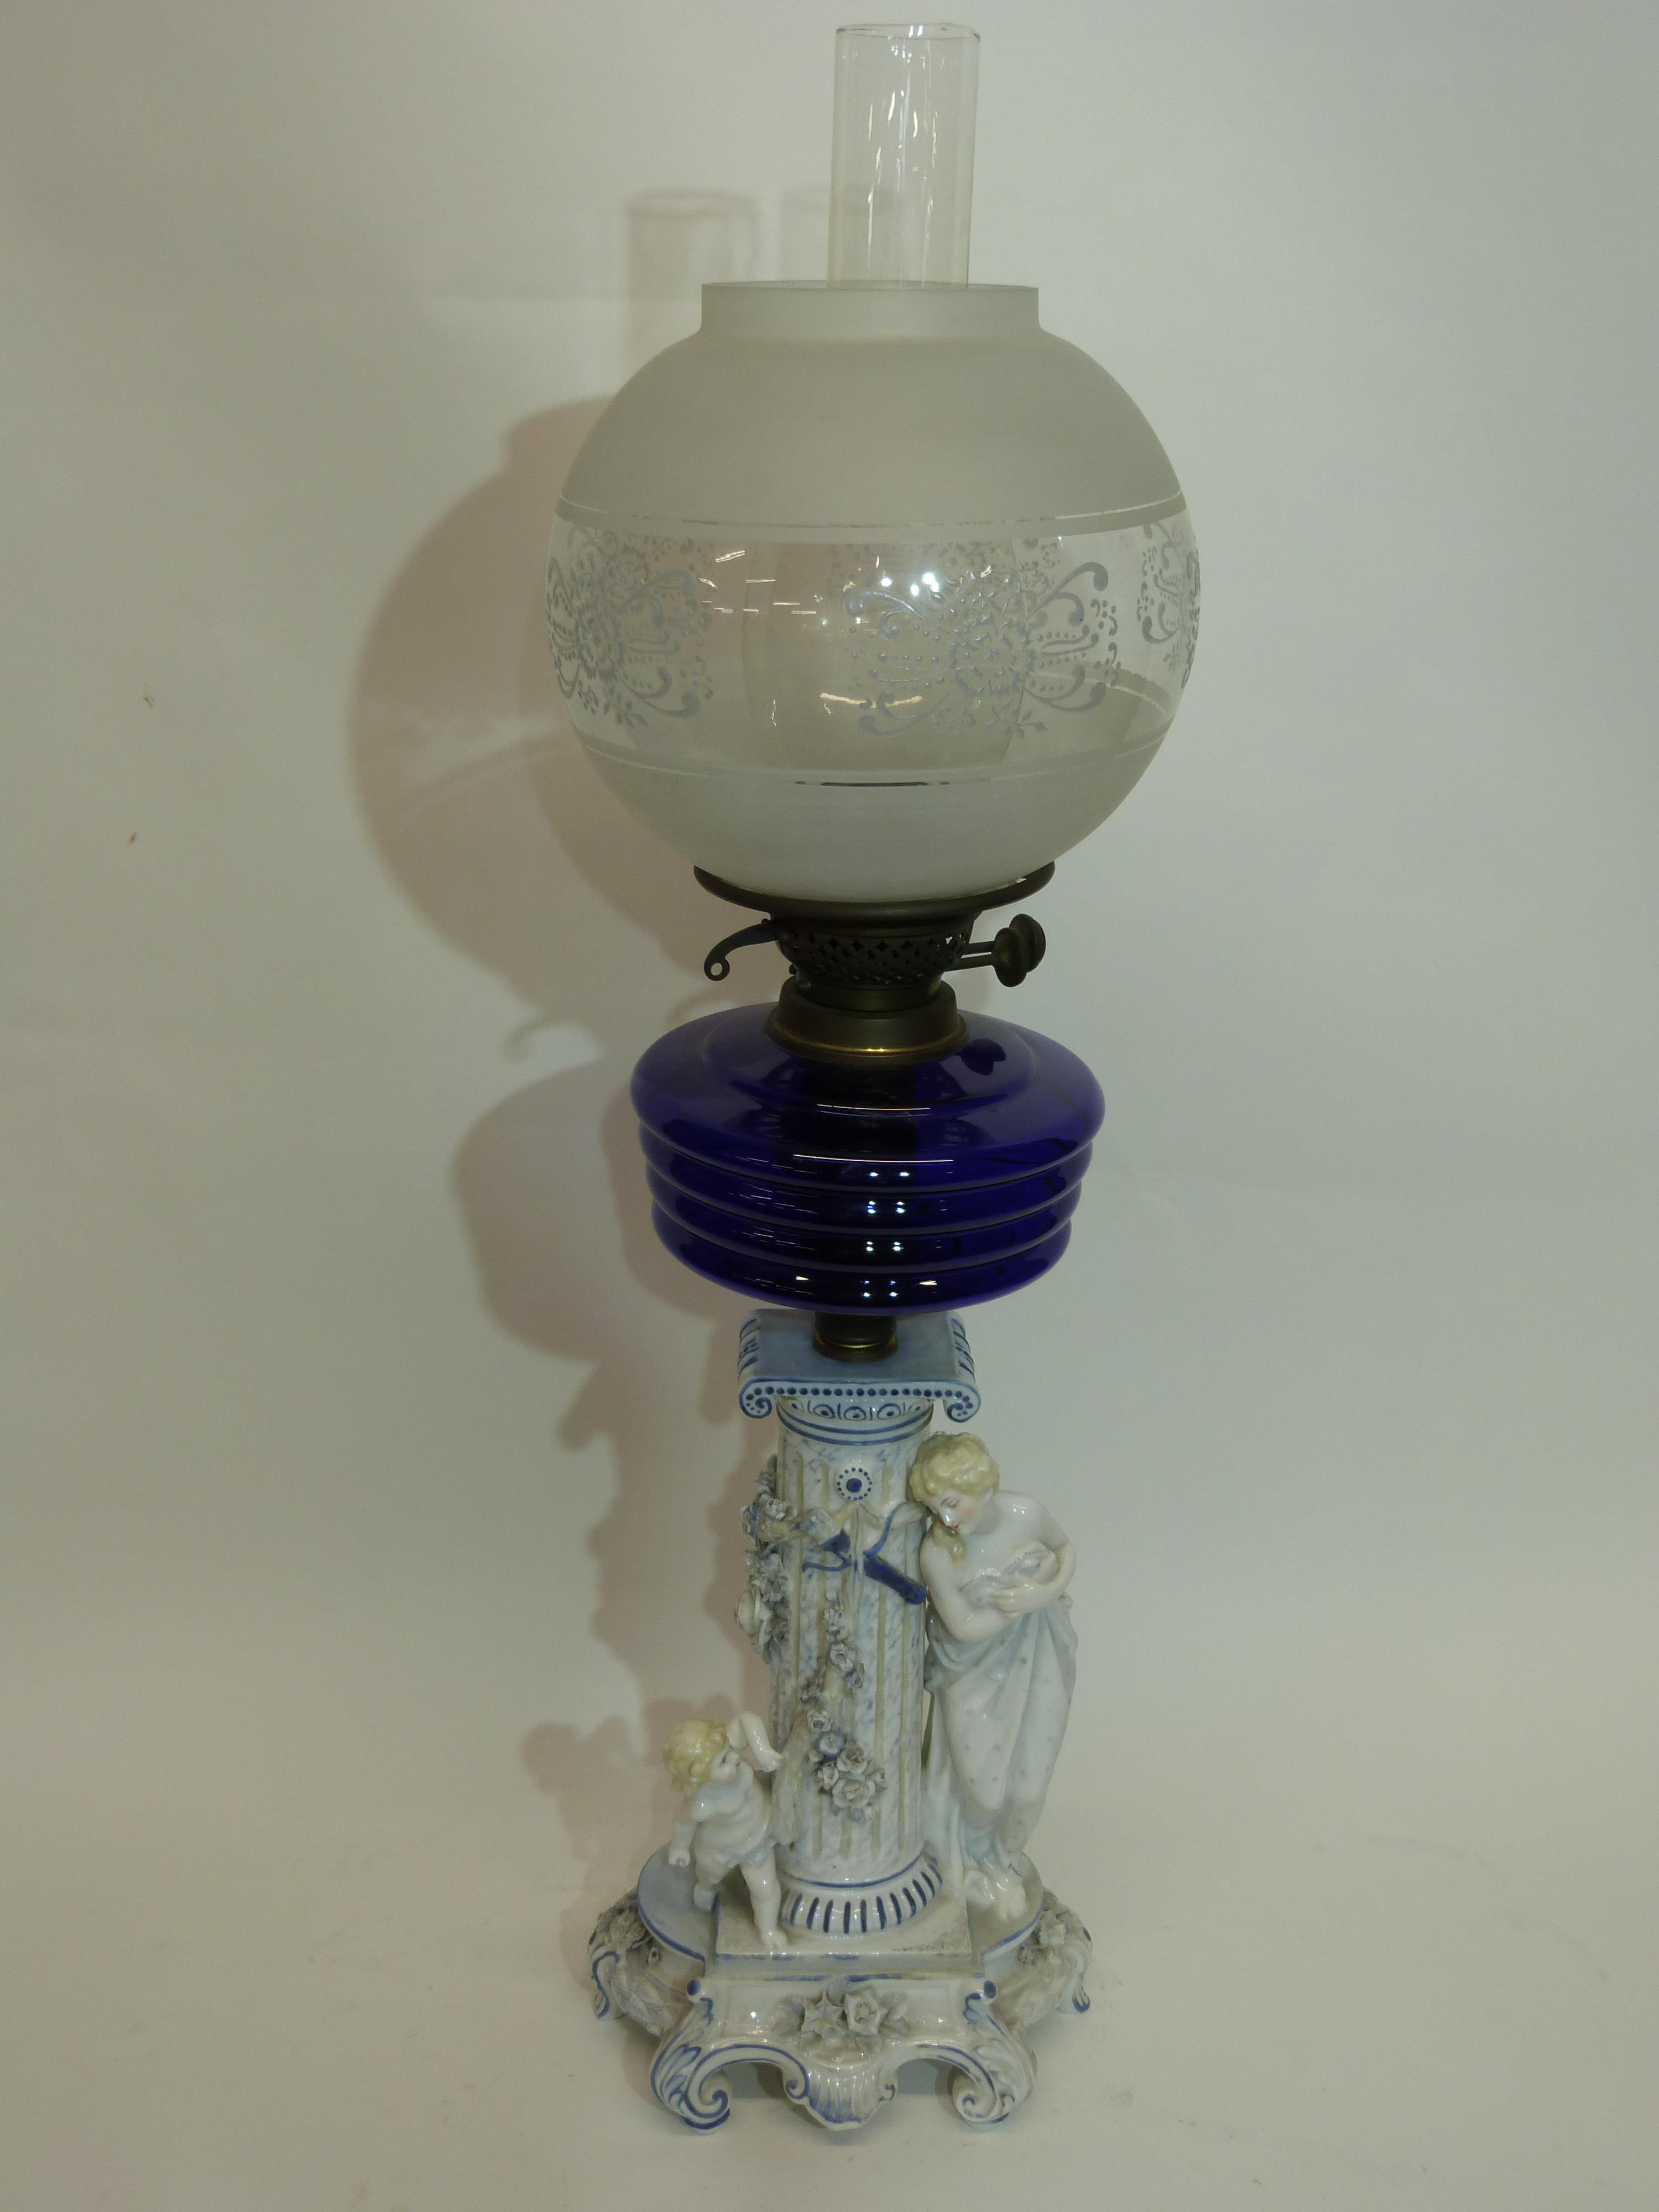 Oil lamp with blue glass reservoir below a white glass floral shade, supported by a porcelain column